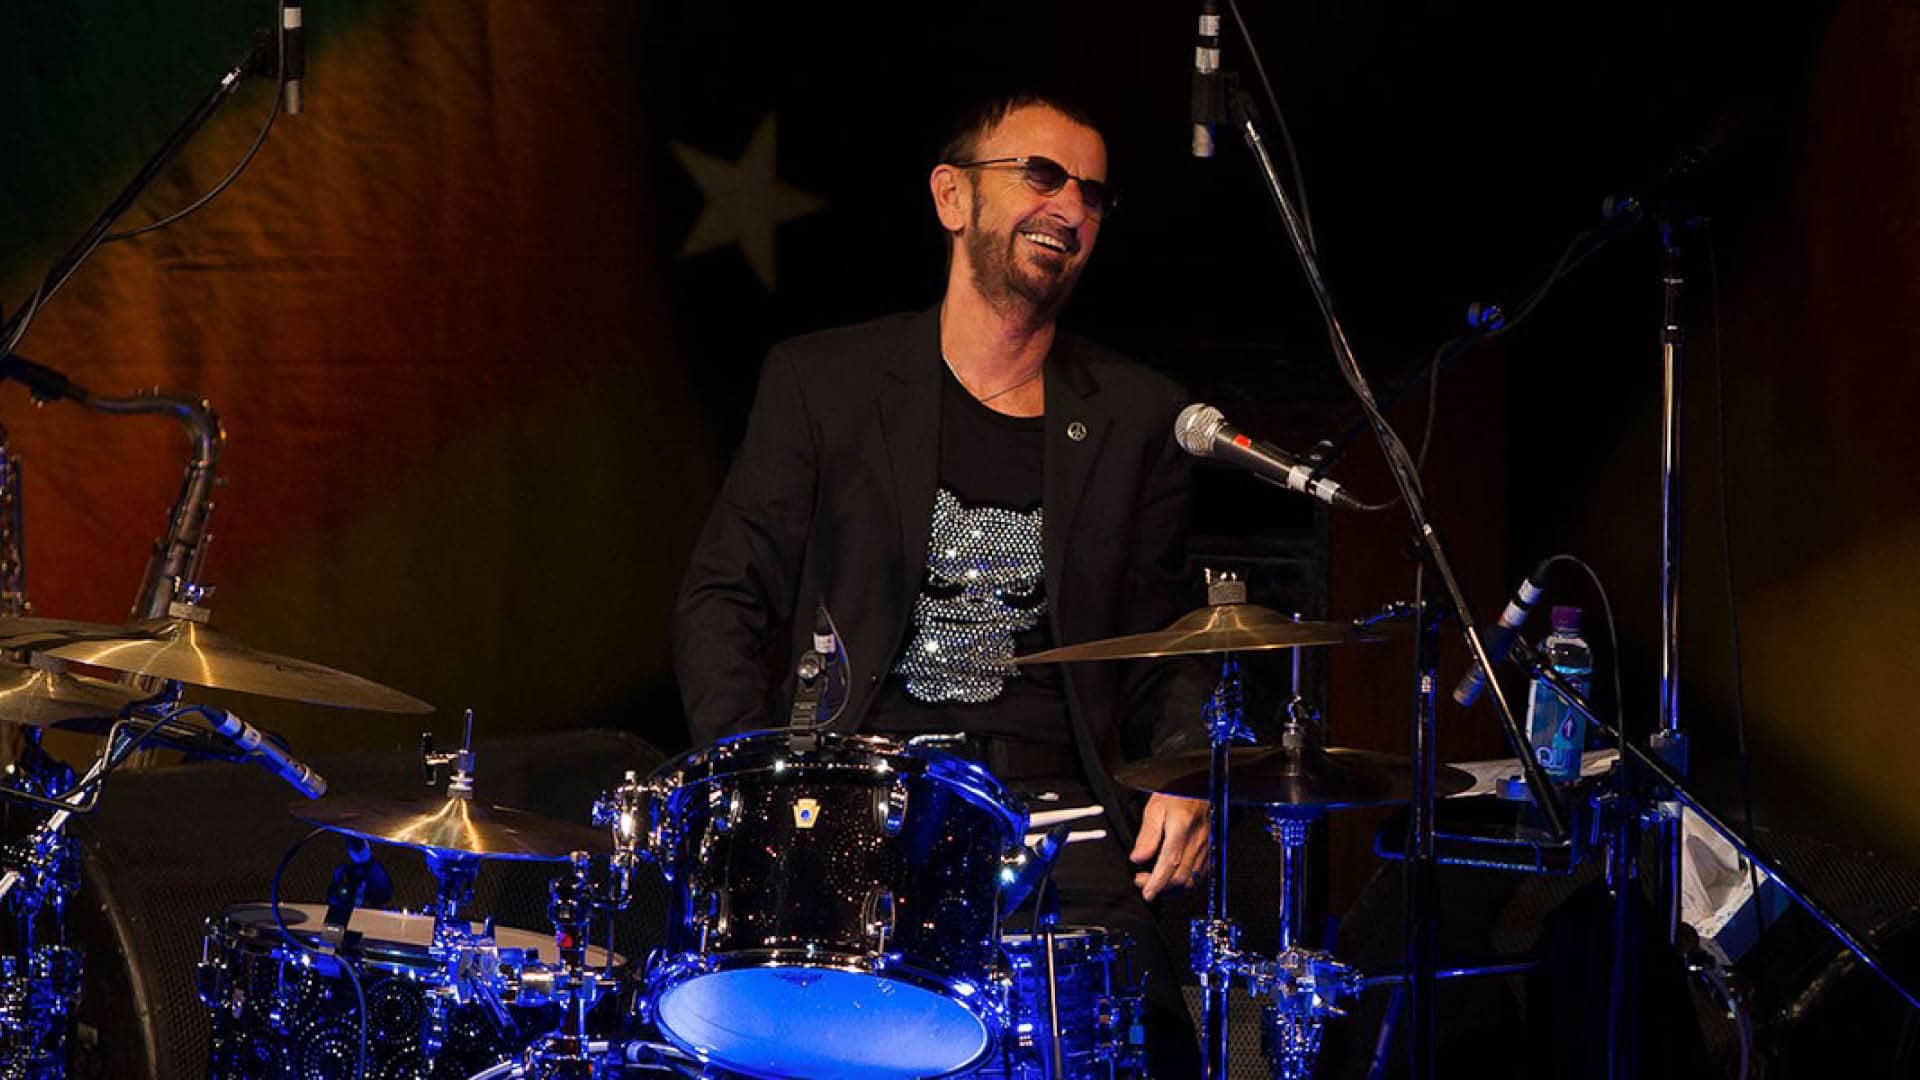 Ringo Starr and his All Starr Band